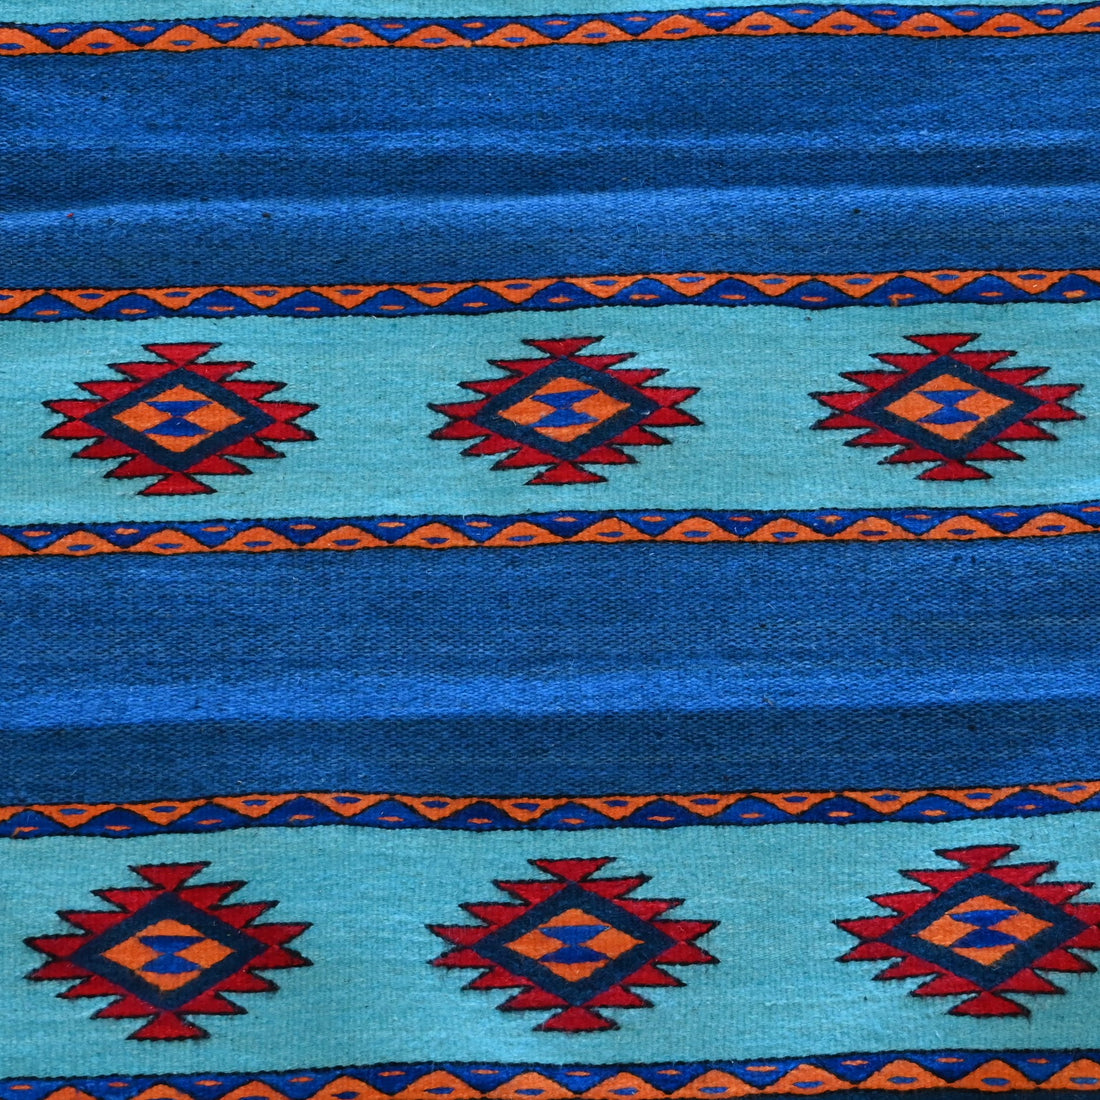 Escalante Rugs Hand Woven by Fidel Lopez view of pattern